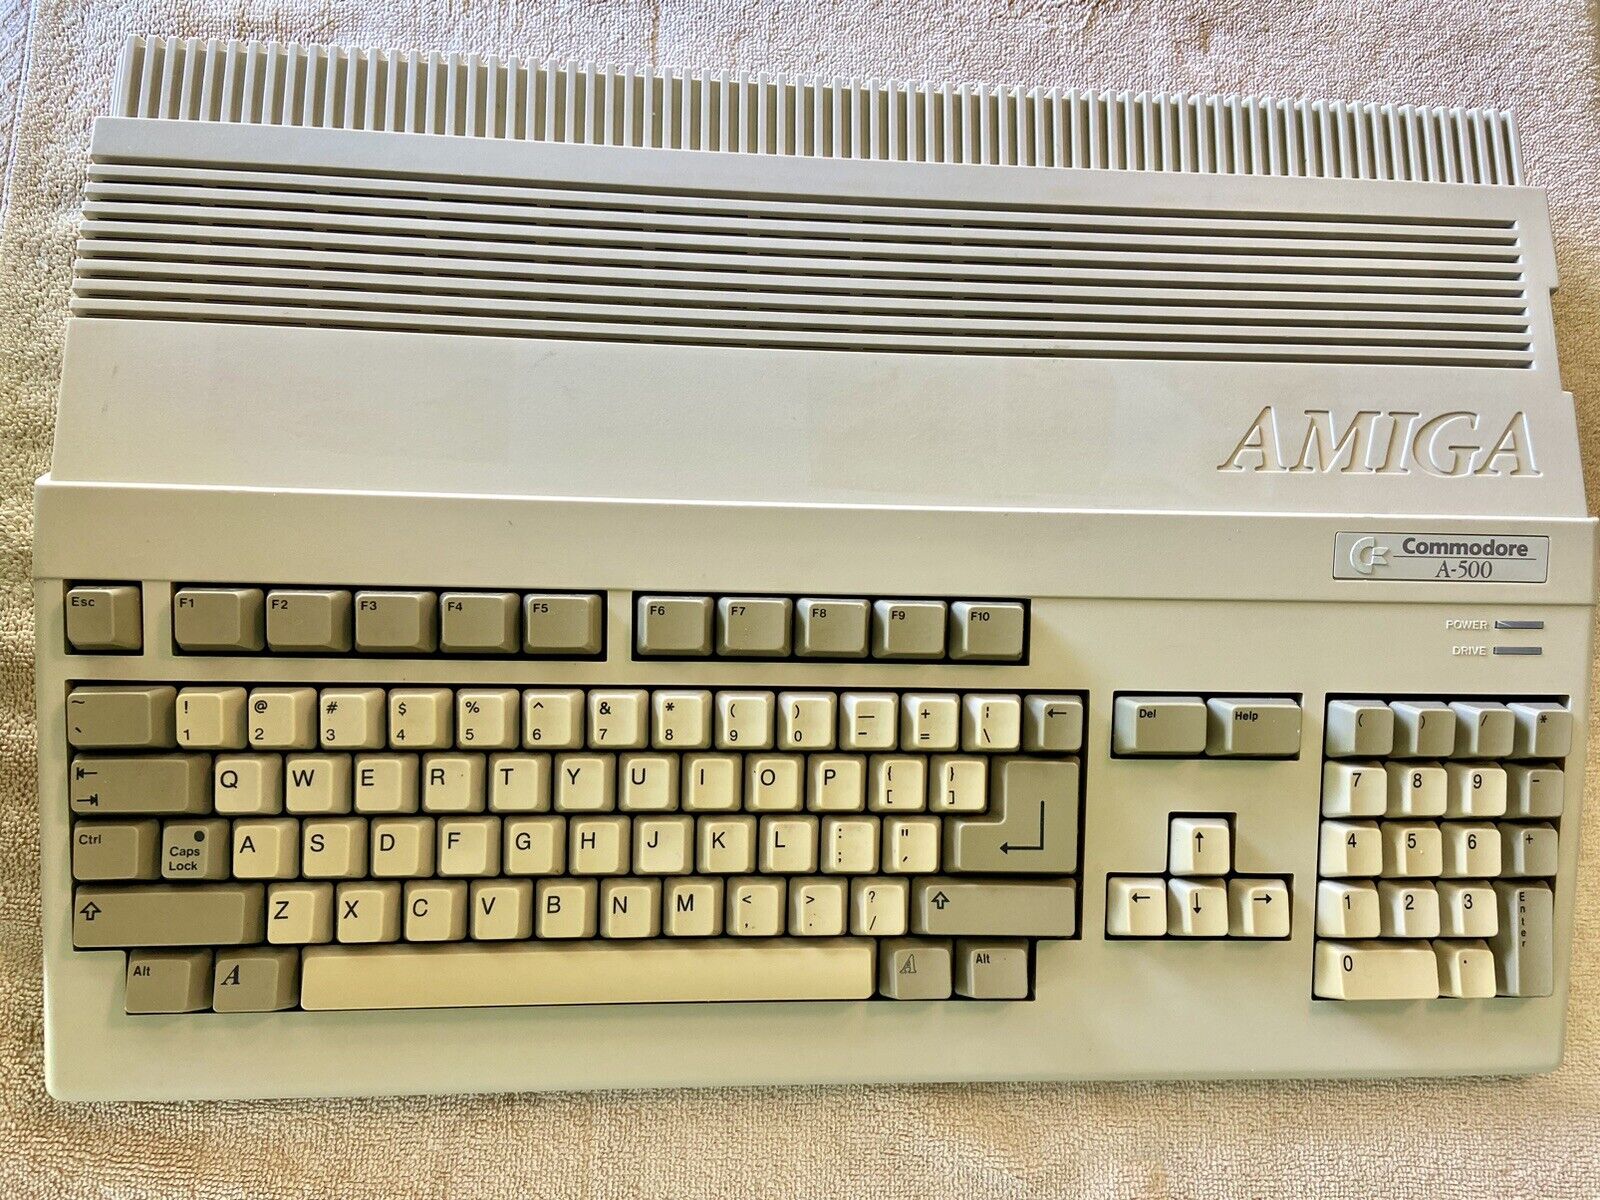 Vintage Commodore Amiga 500 Computer Keyboard Model A500 Sold As Is